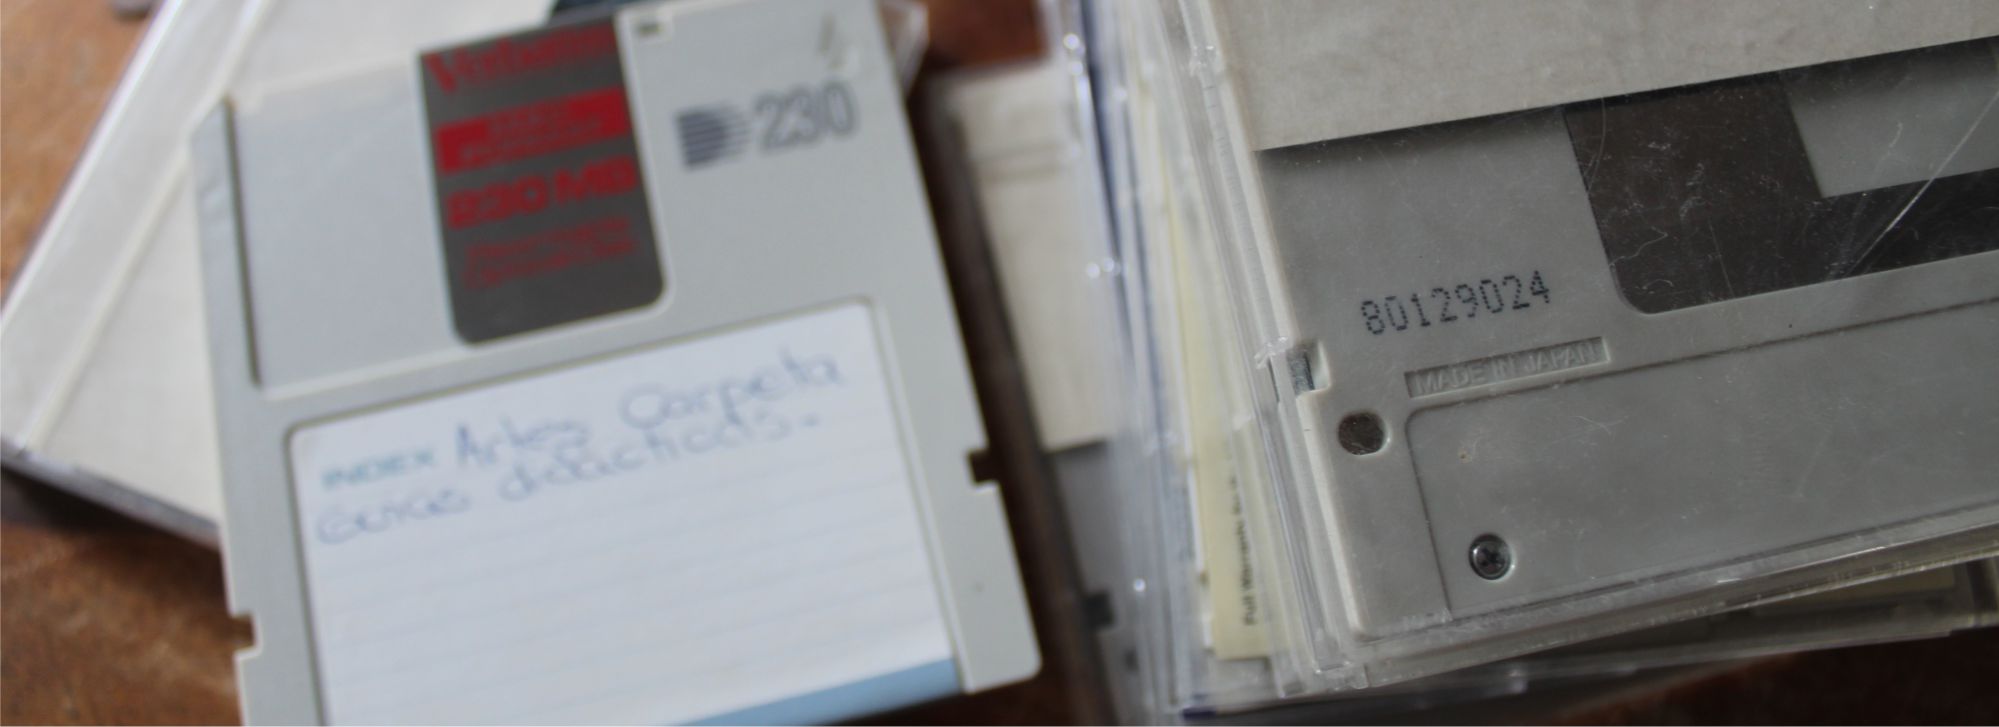 The old diskettes